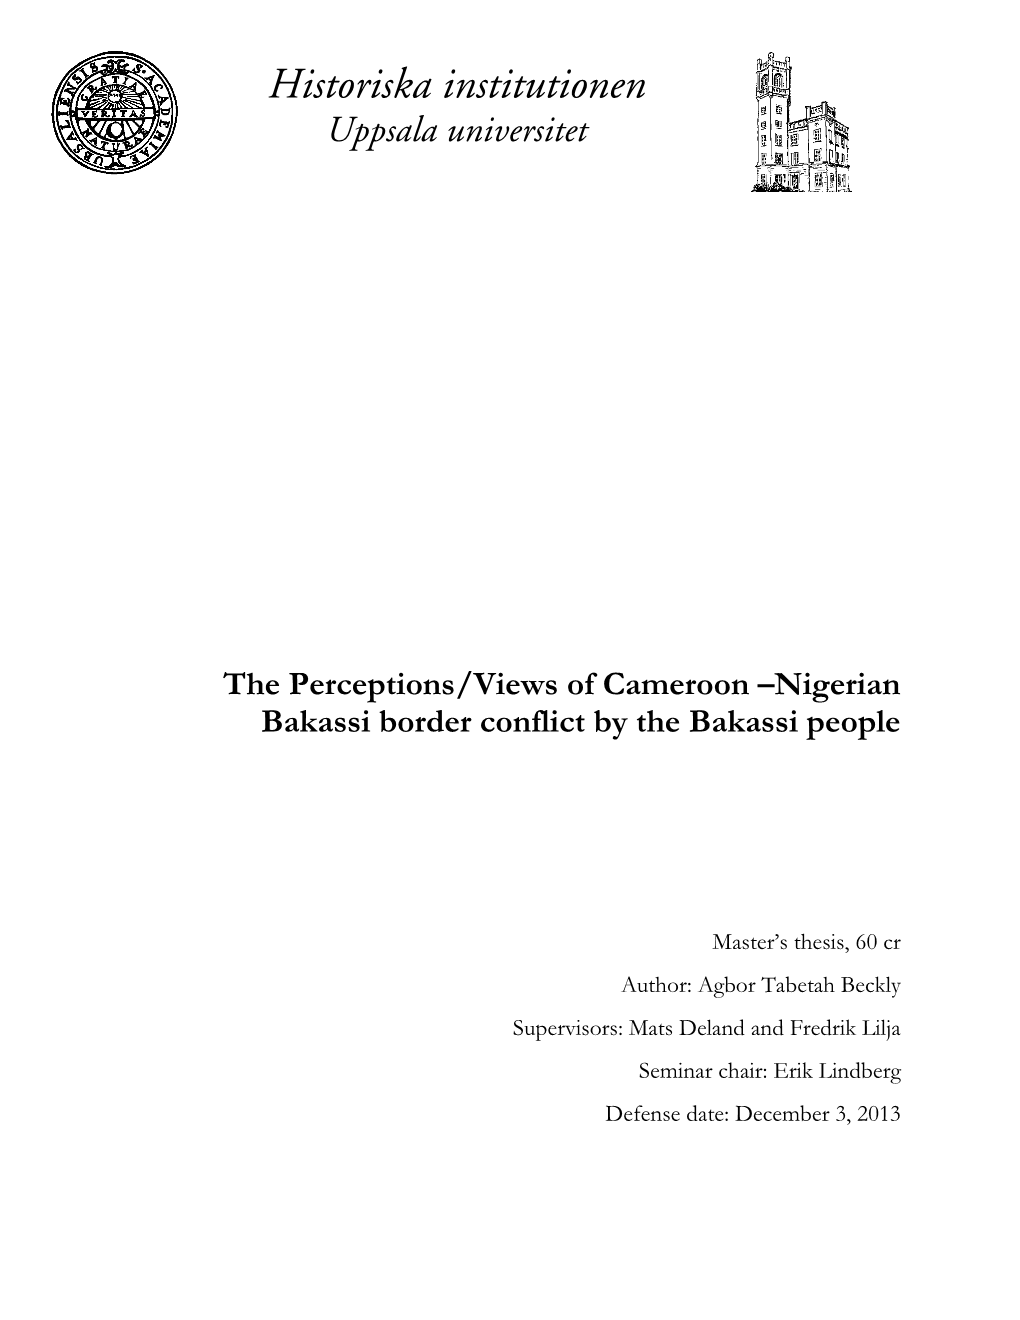 The Perceptions/Views of Cameroon –Nigerian Bakassi Border Conflict by the Bakassi People. 1994-2008